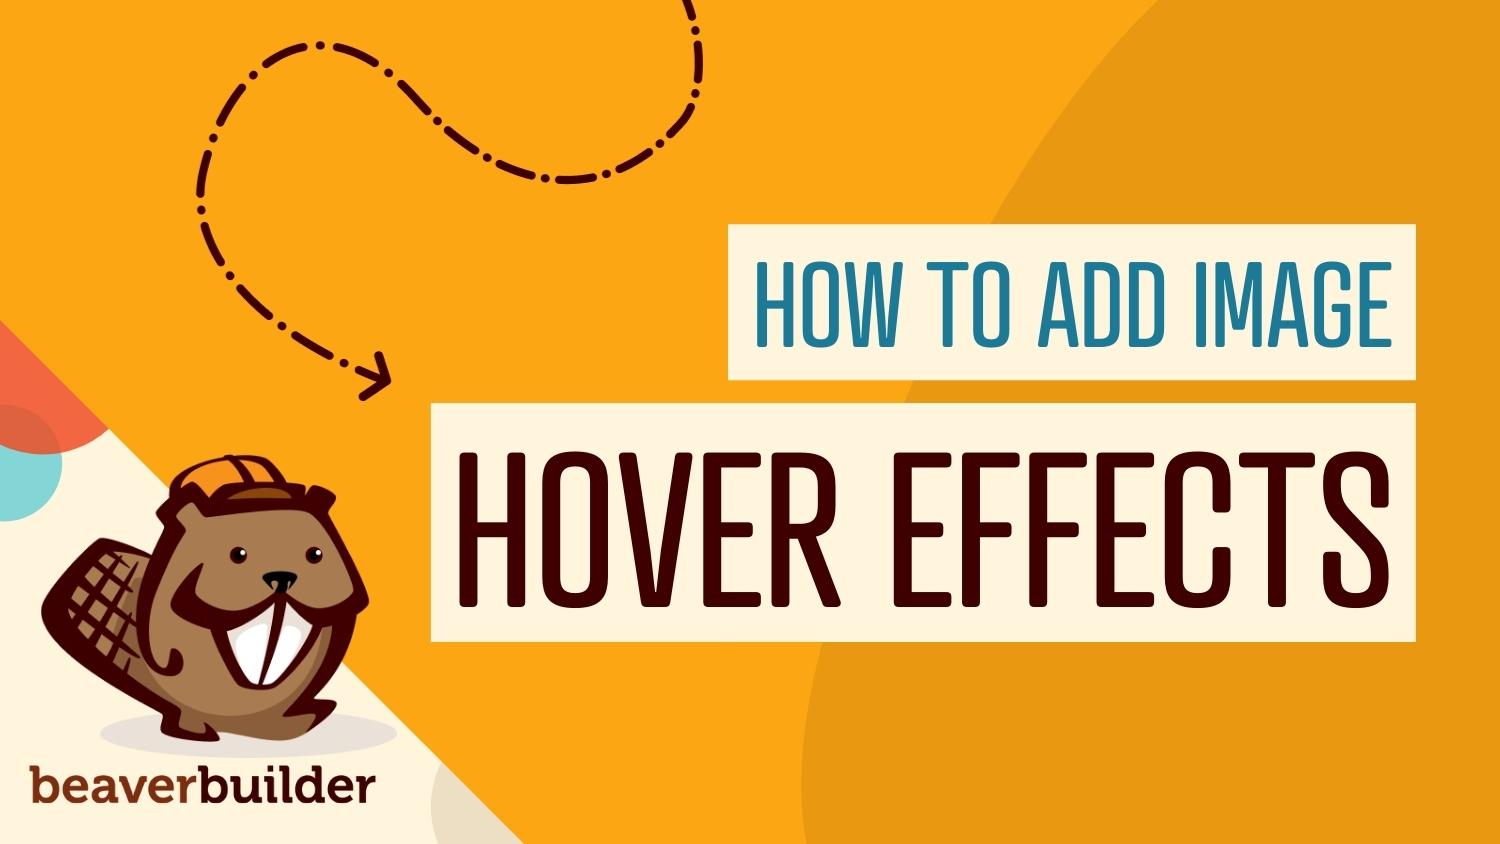 How to add image hover effects in wordpress | Beaver Builder Blog